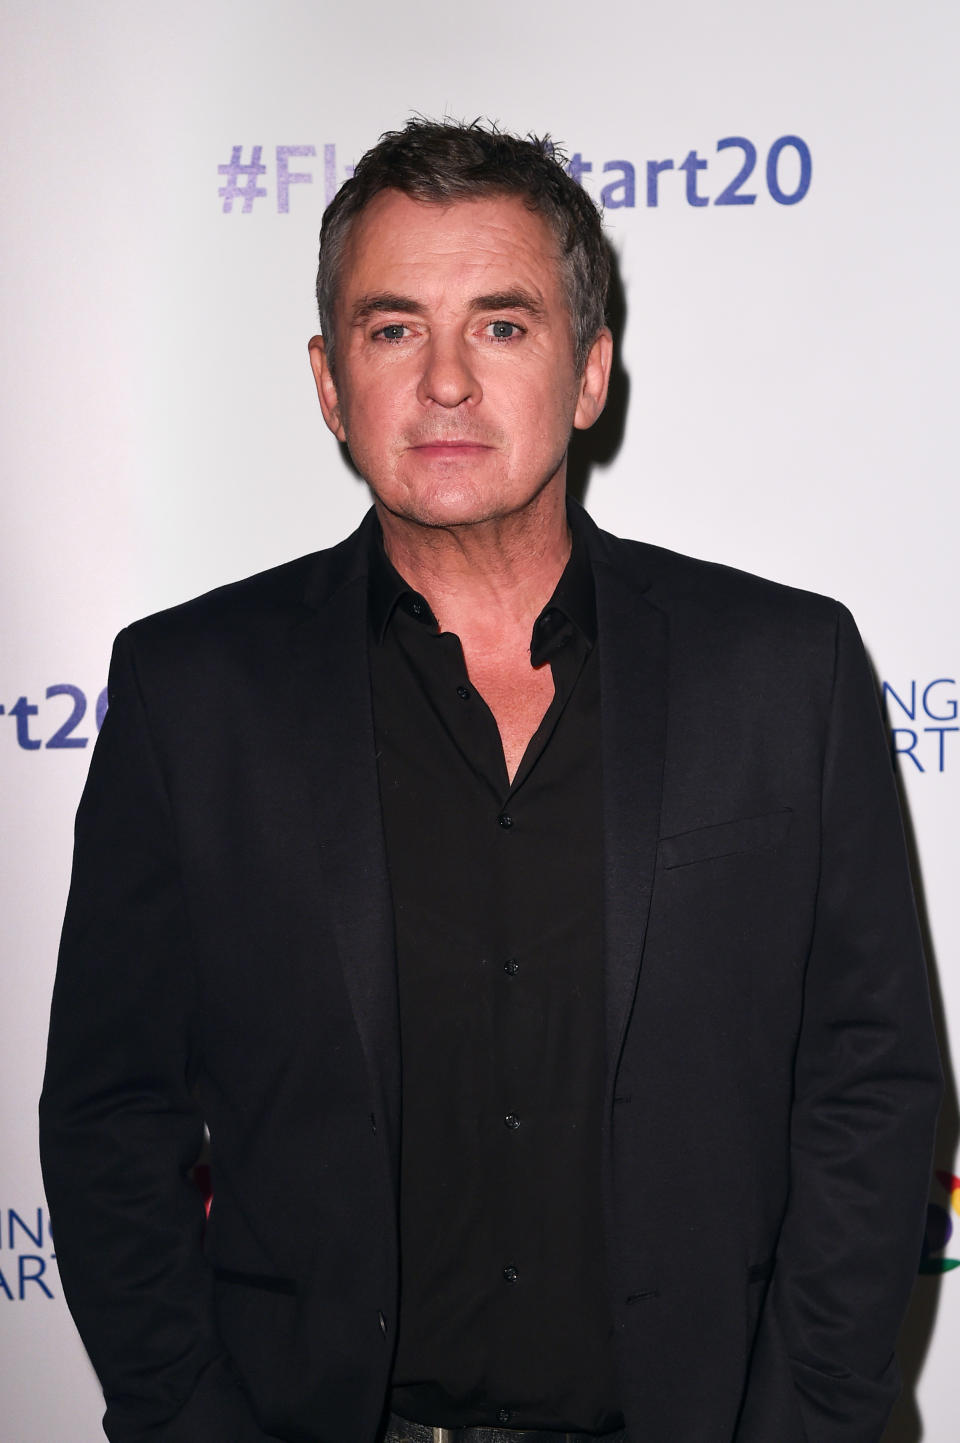 LONDON, ENGLAND - NOVEMBER 15:  Shane Richie attends British Airways champagne reception to celebrate the airline raising £20 million for Comic Relief, through it's charity Flying Start, at the Science Museum on November 15, 2018 in London, England. (Photo by Eamonn M. McCormack/Getty Images for British Airways)